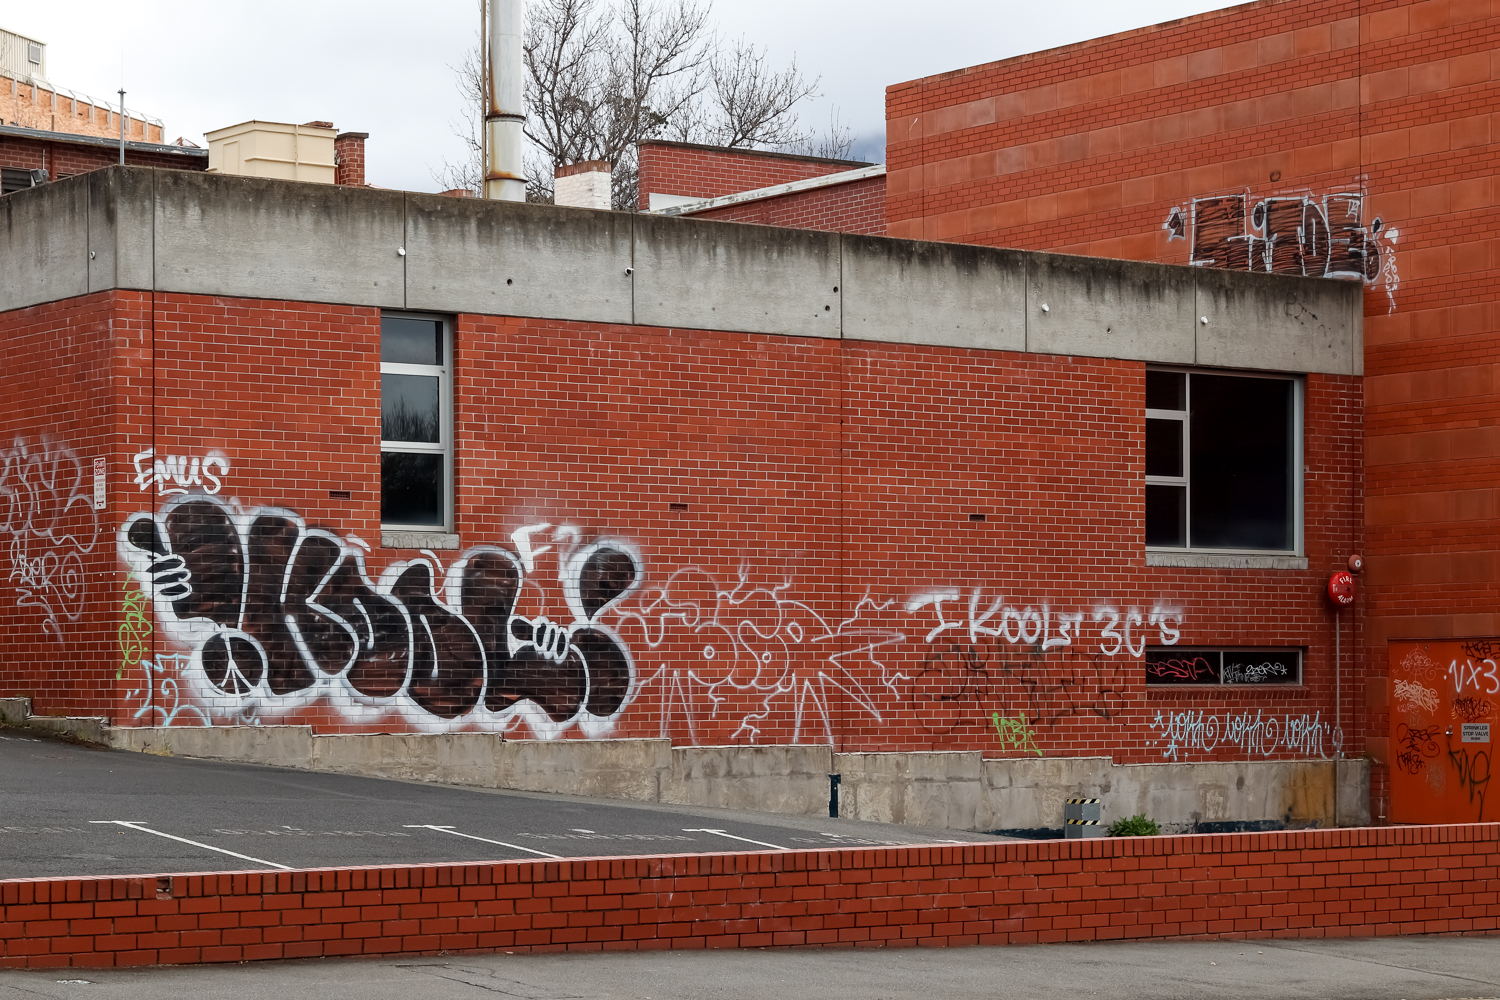 A graffitied red brick building